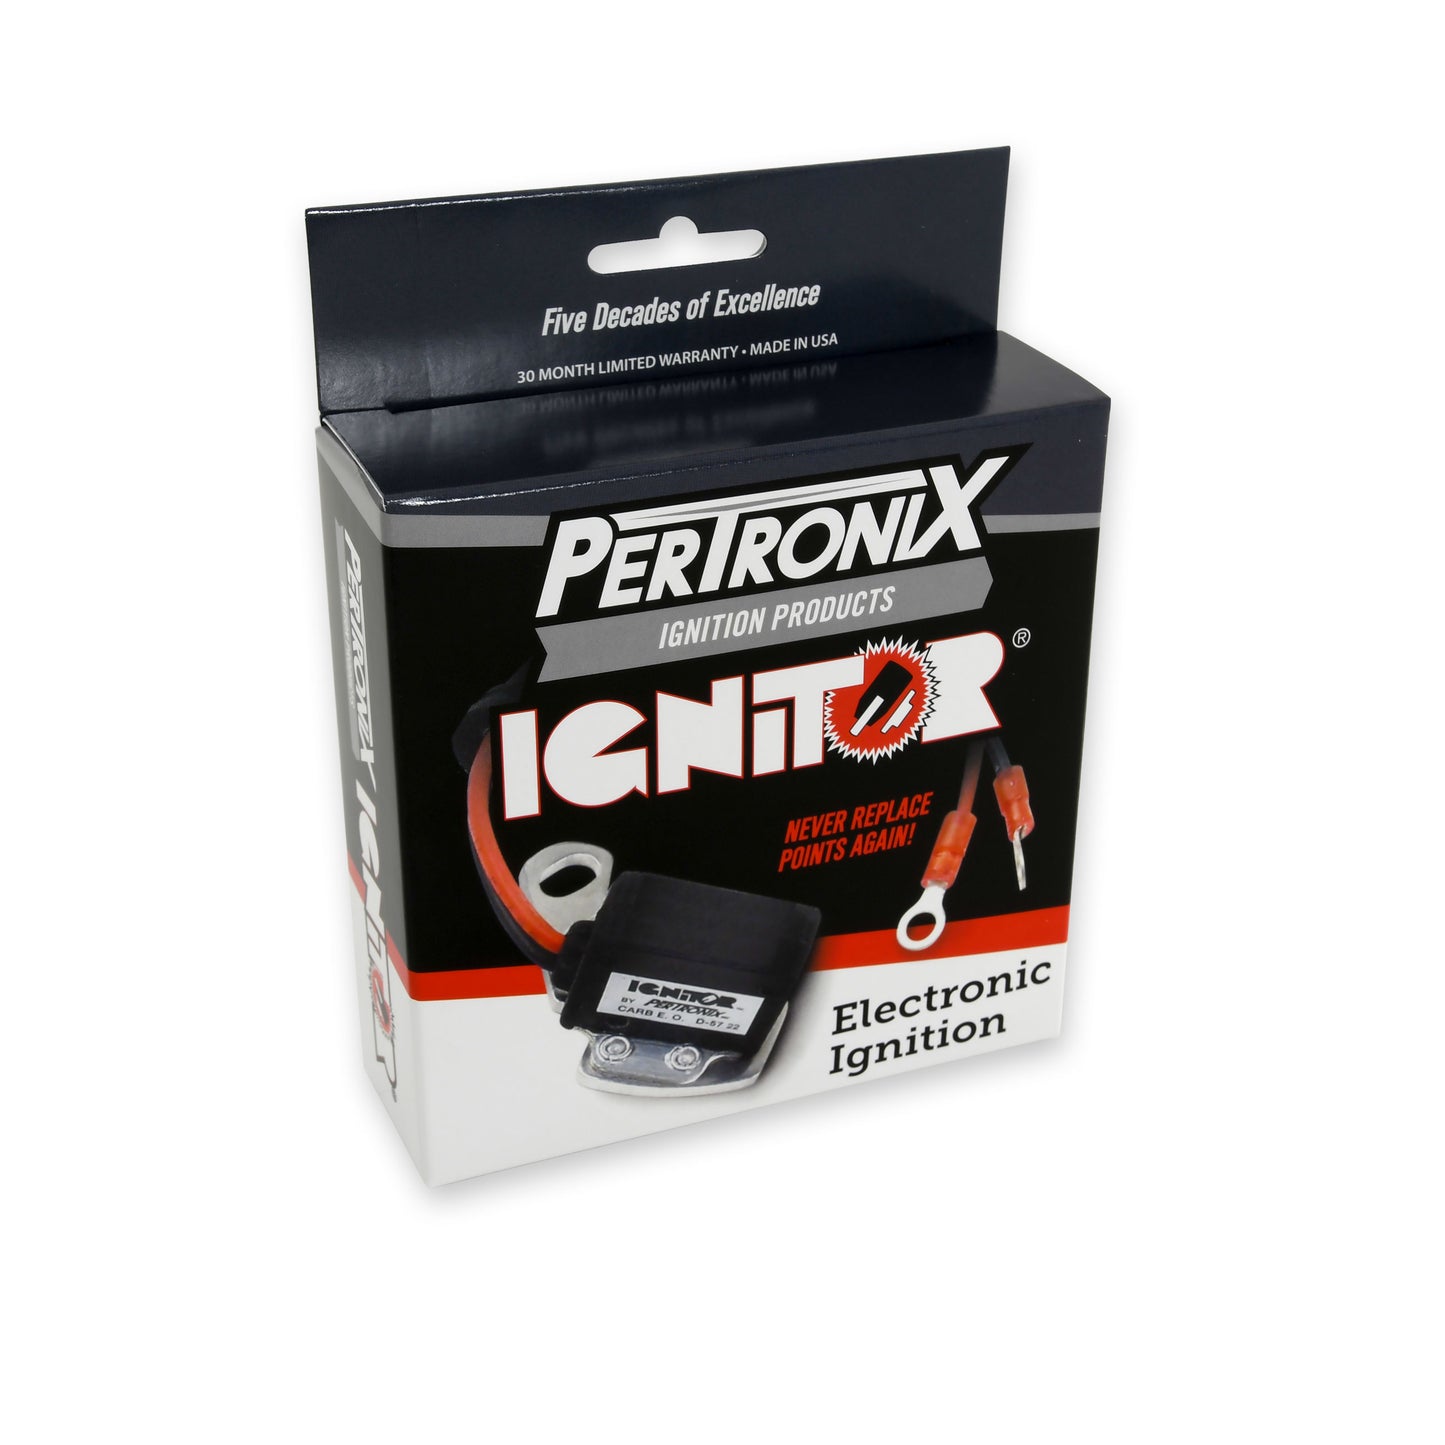 PerTronix Ignitor Electronic Ignition Conversion Kit-1142P12-package